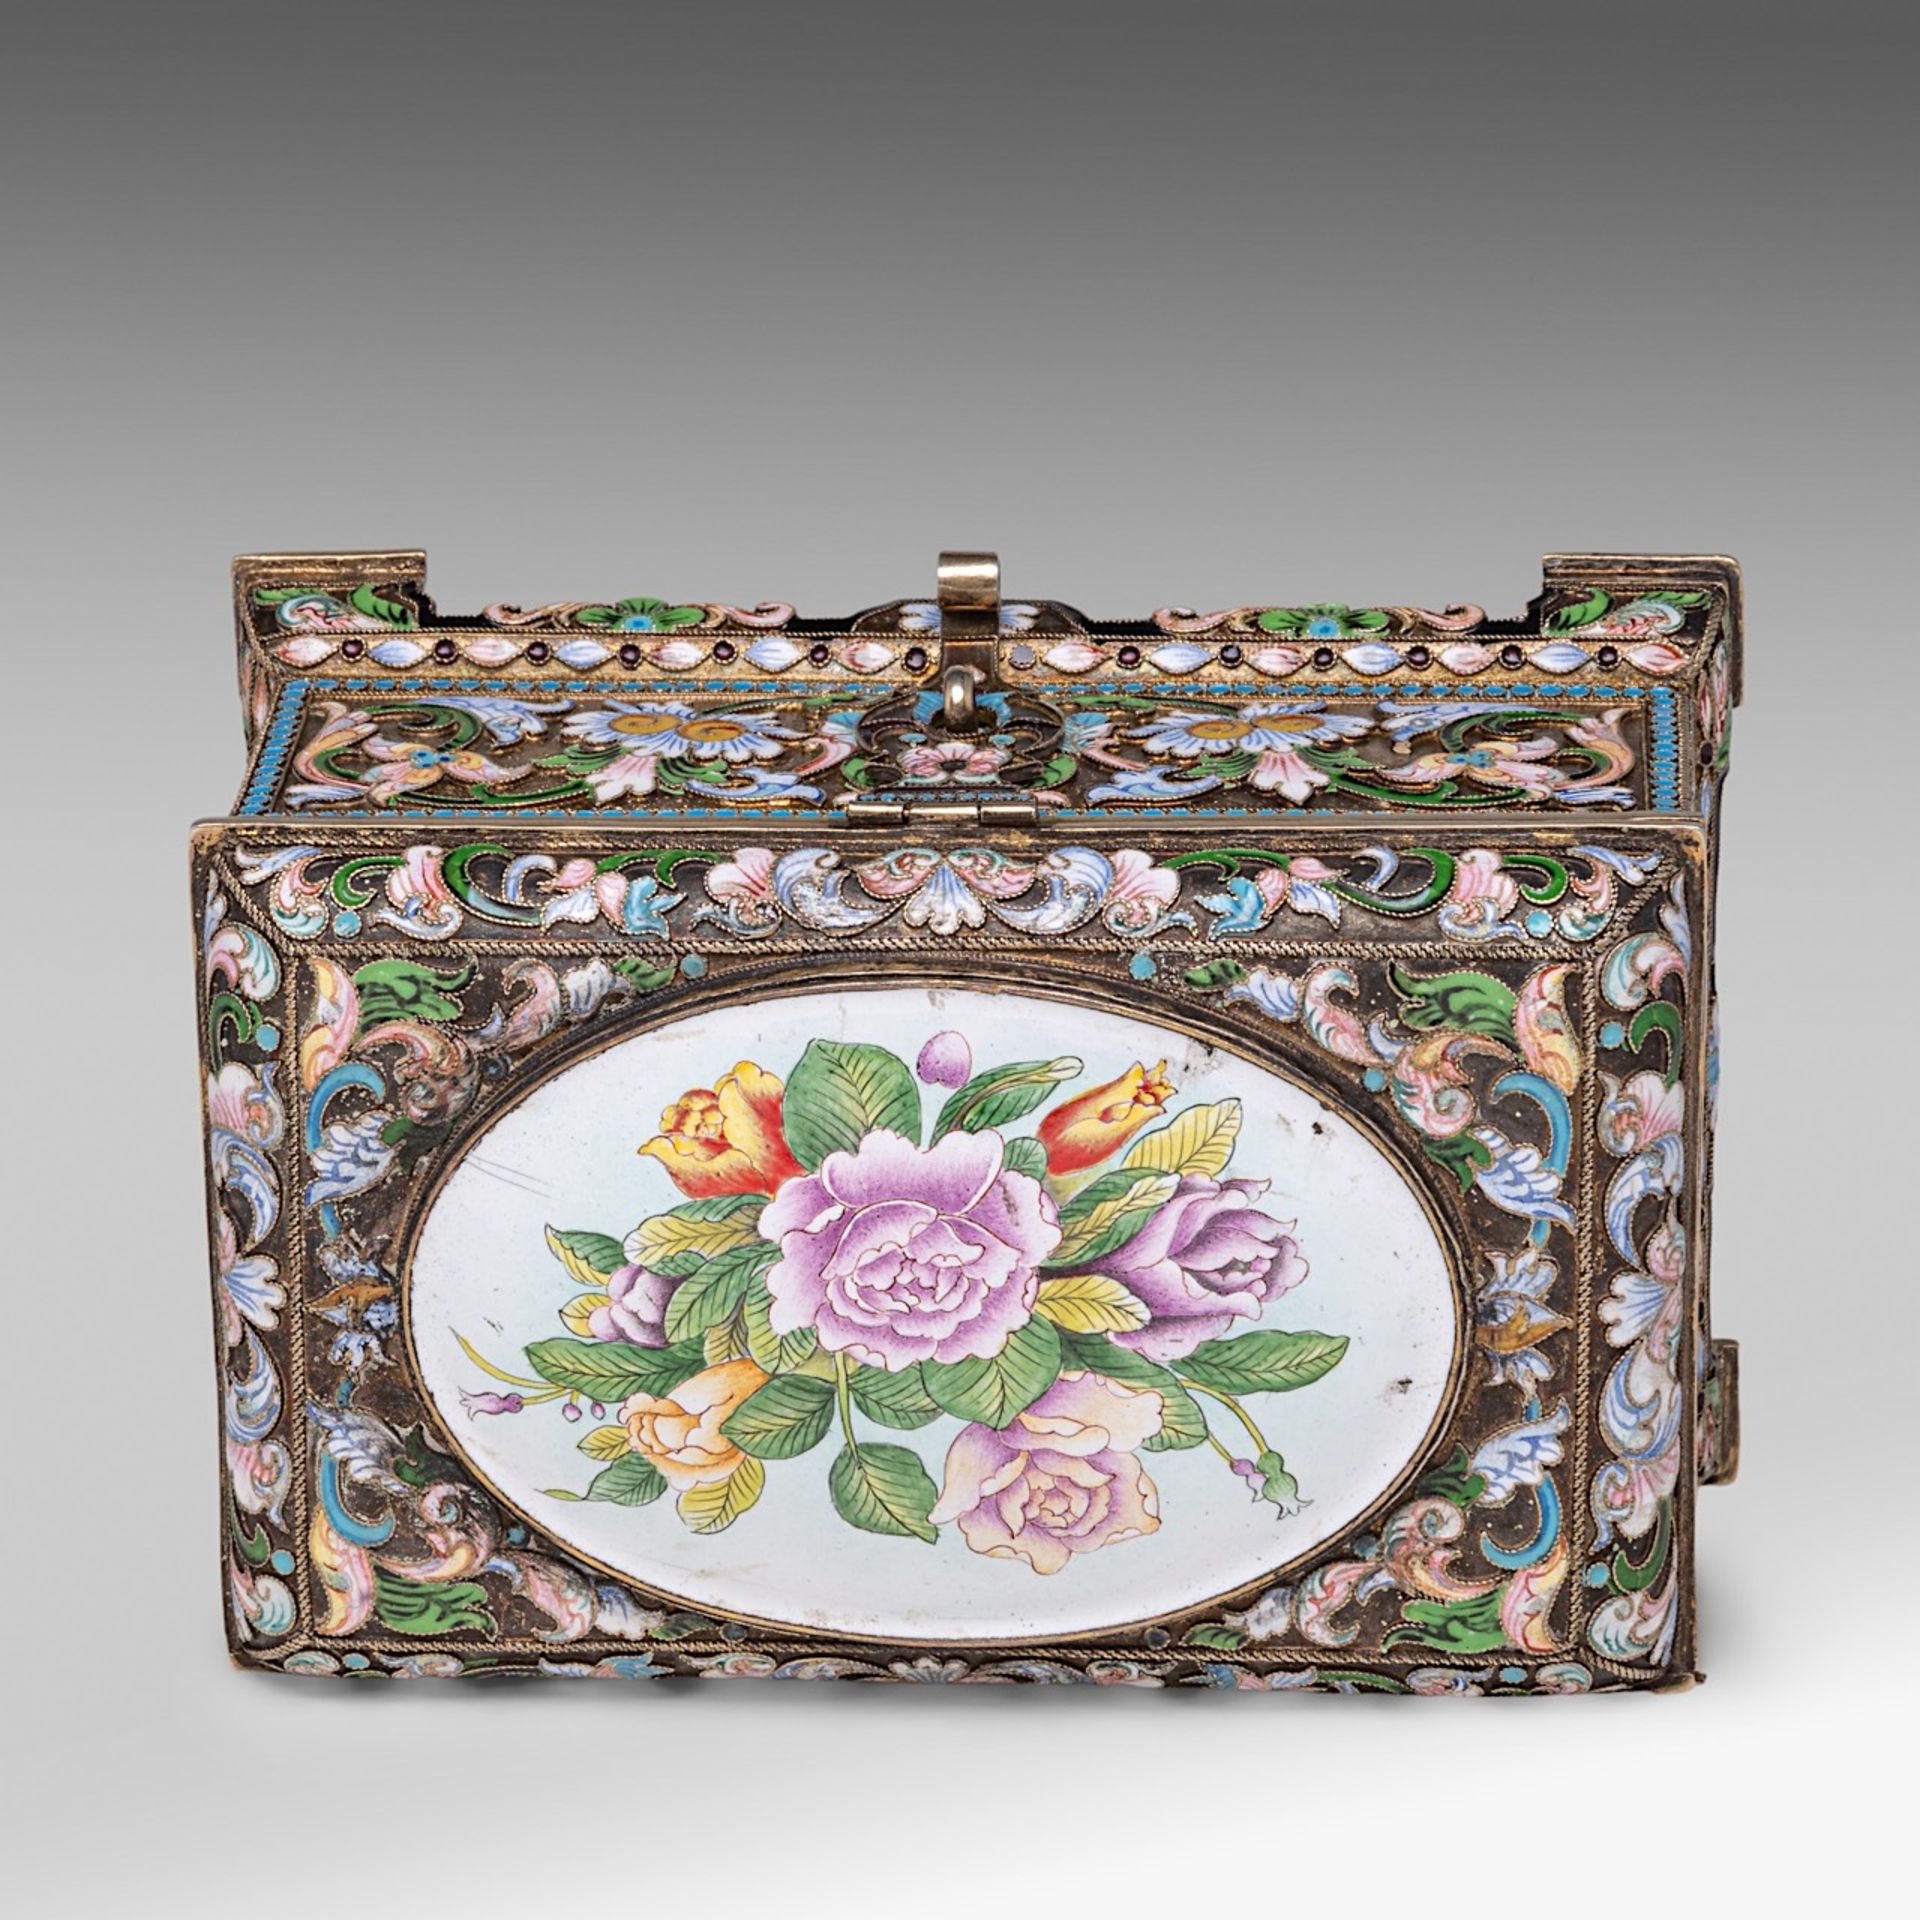 A Russian silver and enamel floral decorated jewellery box, hallmarked 84 Zolotniki, H 8 - 15 - 10 c - Image 6 of 9